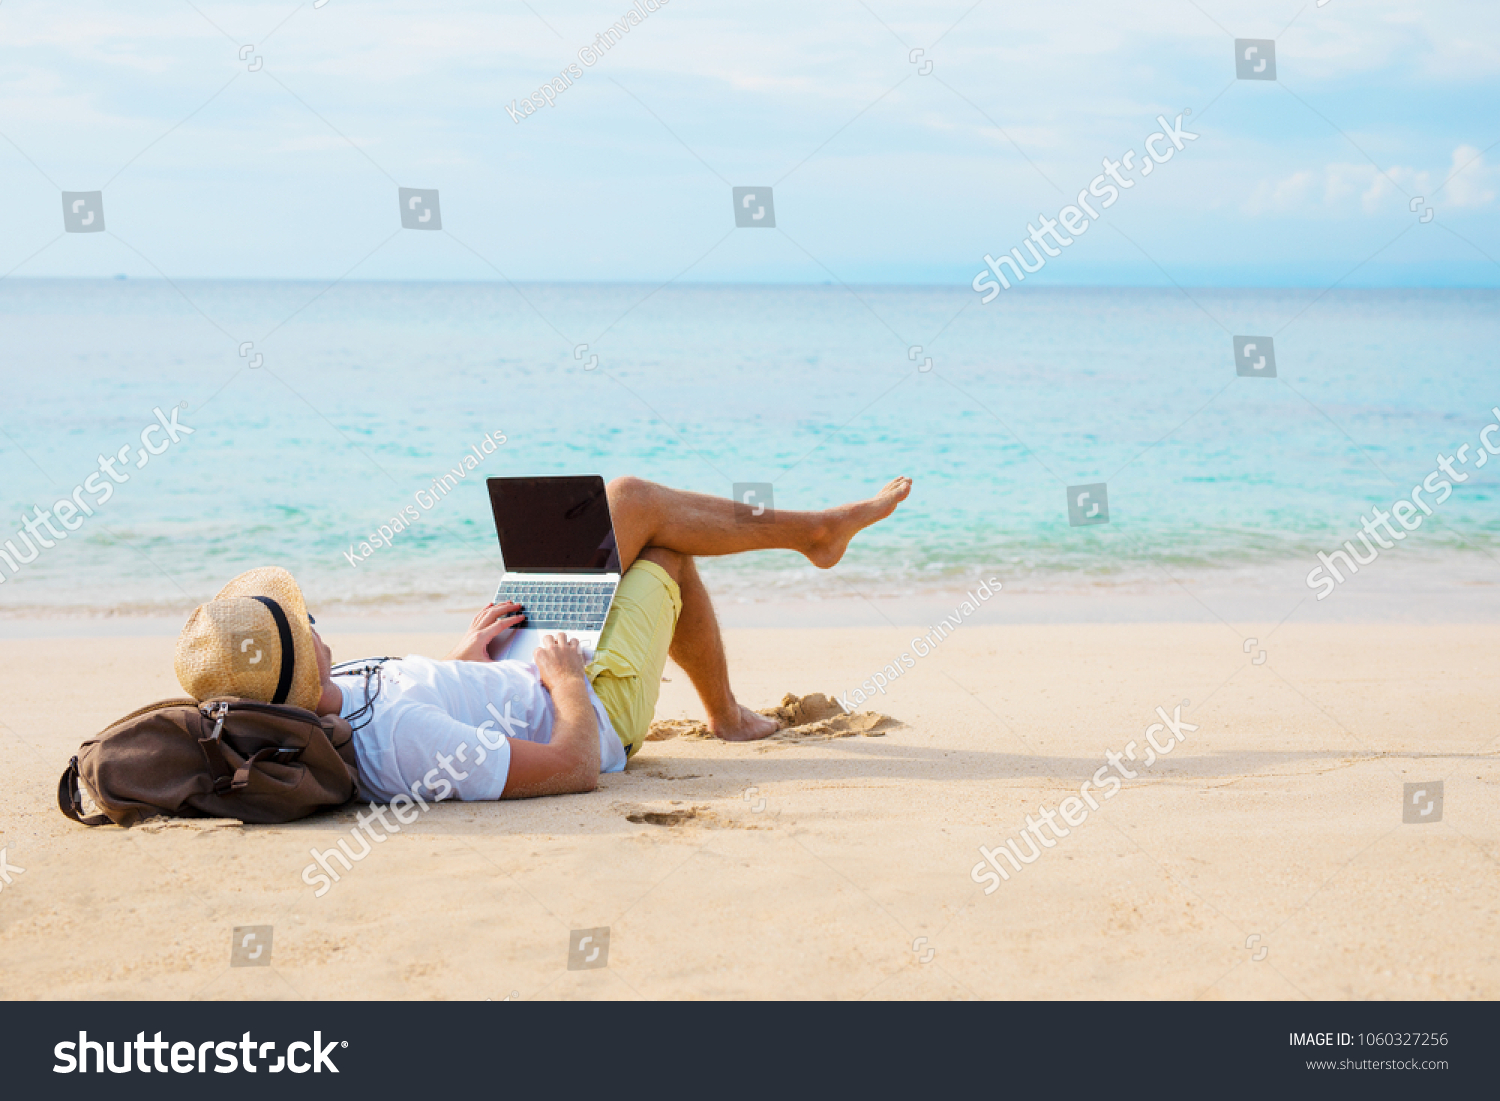 Man working on laptop computer while relaxing on the beach #1060327256